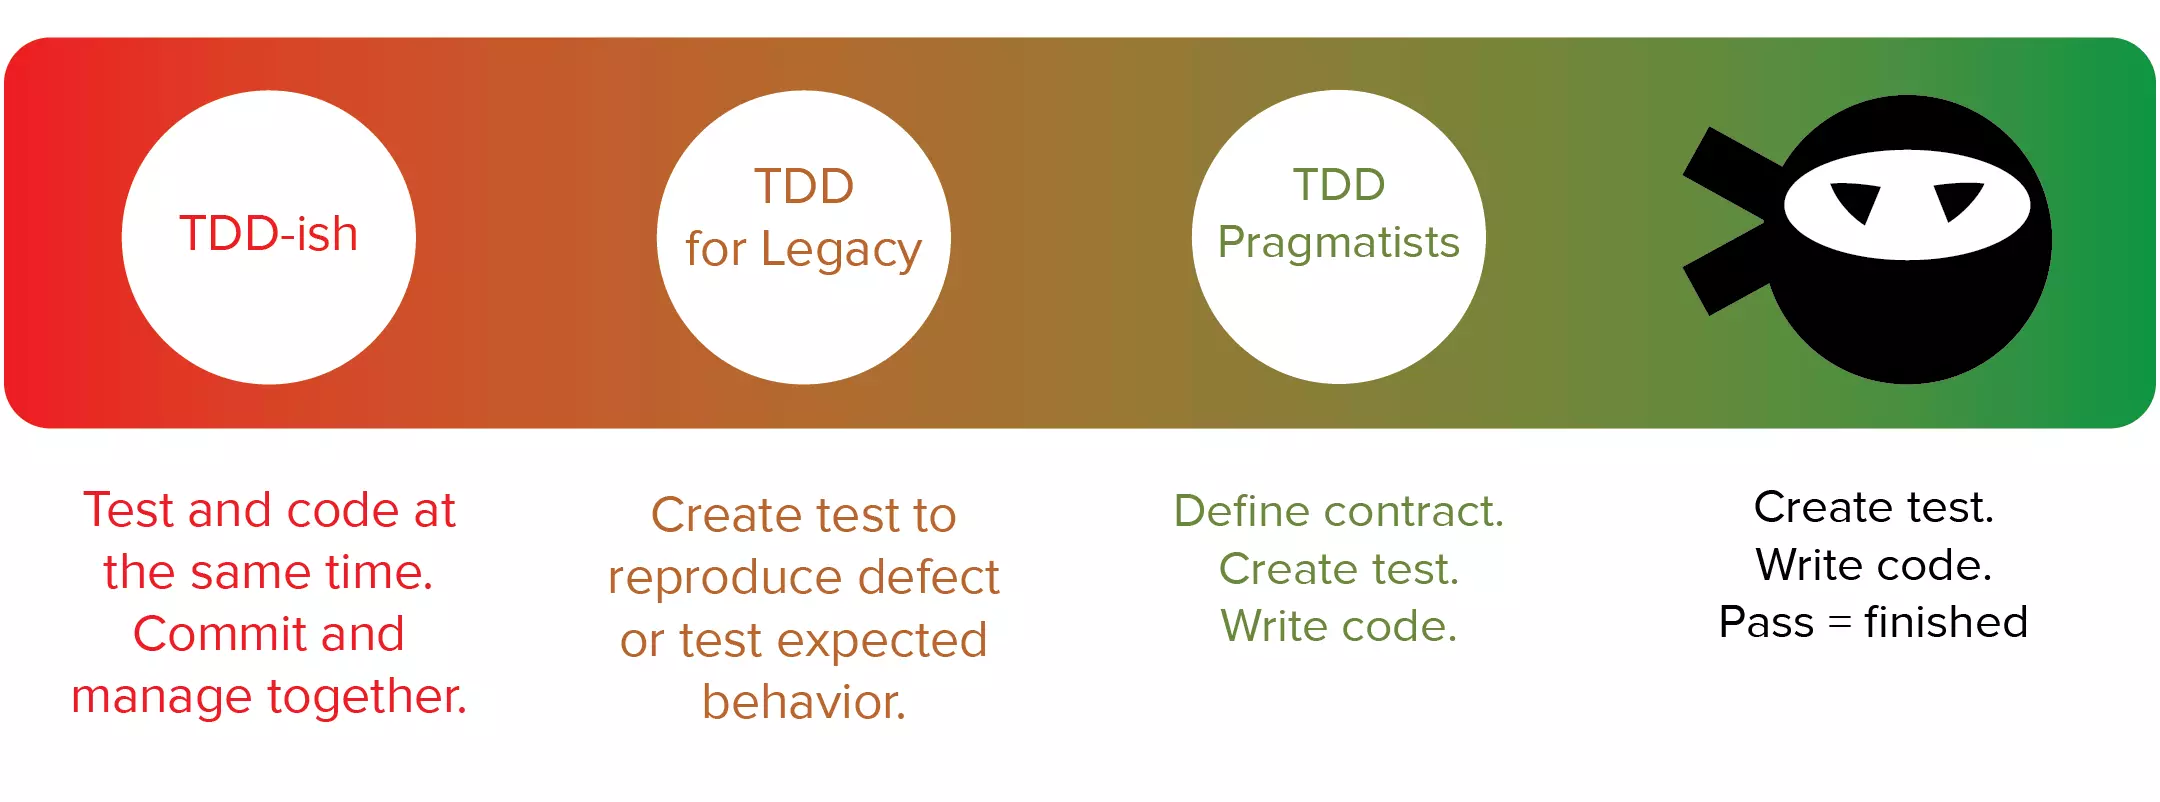 4 Tips for Adopting Test-Driven Development (TDD) in Your Organization